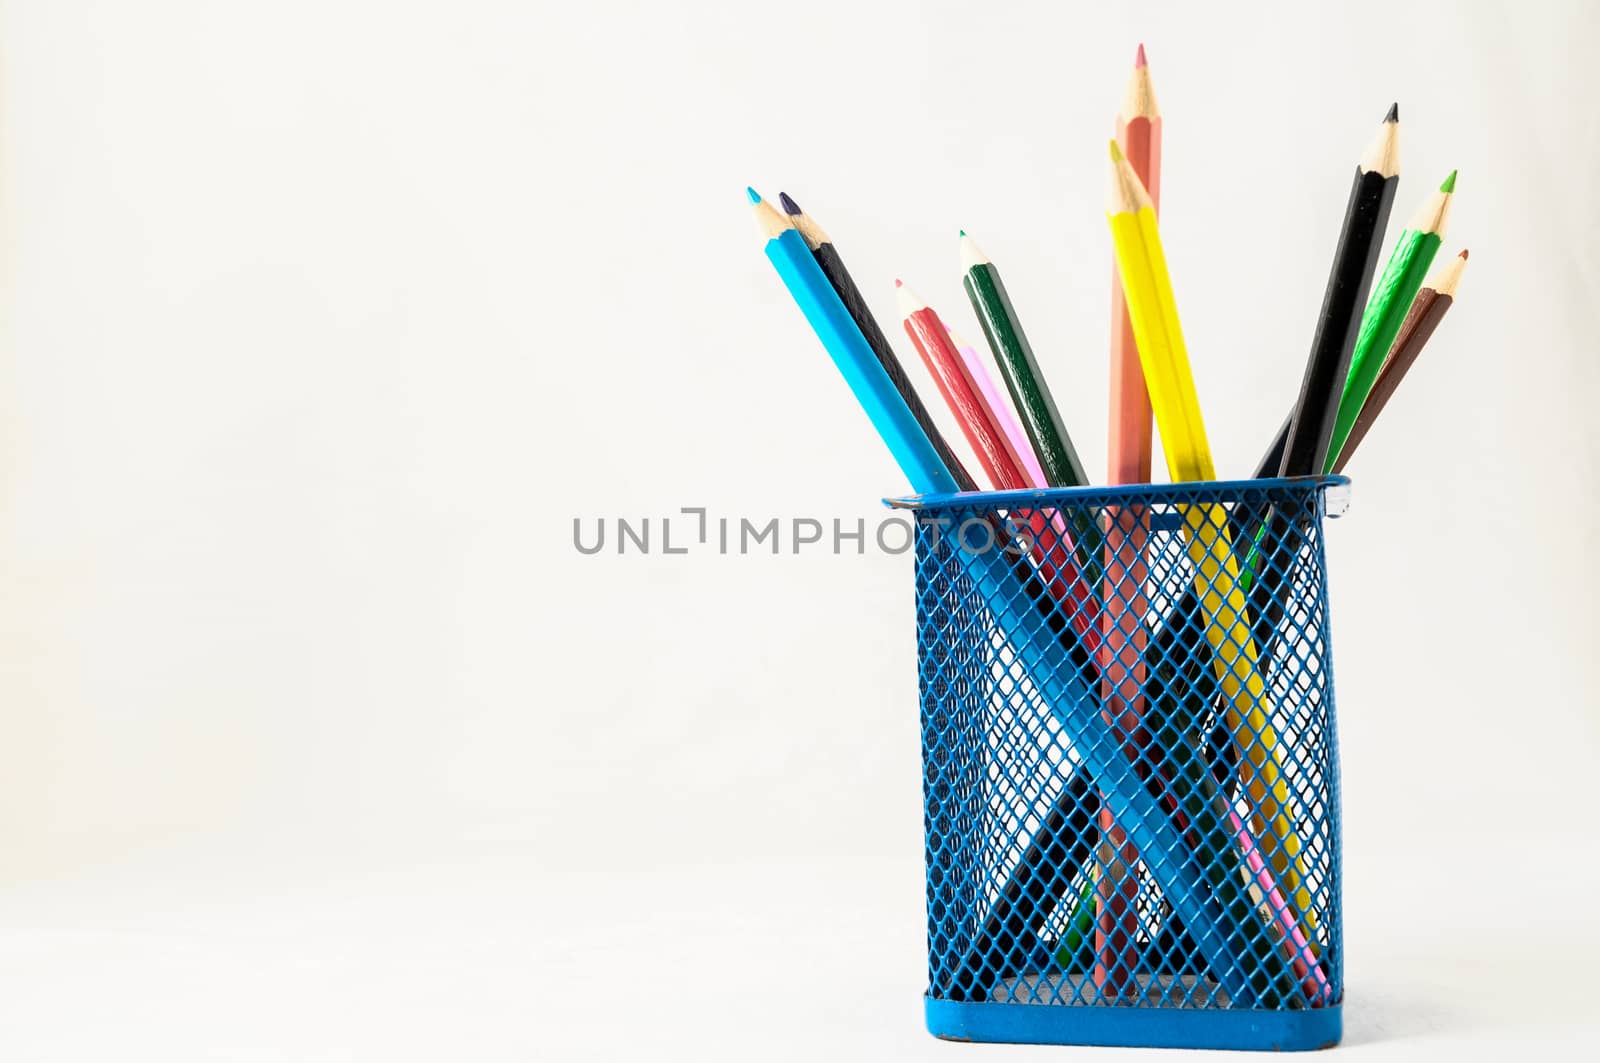 New Pencils Textured Set in Container box on a White Background